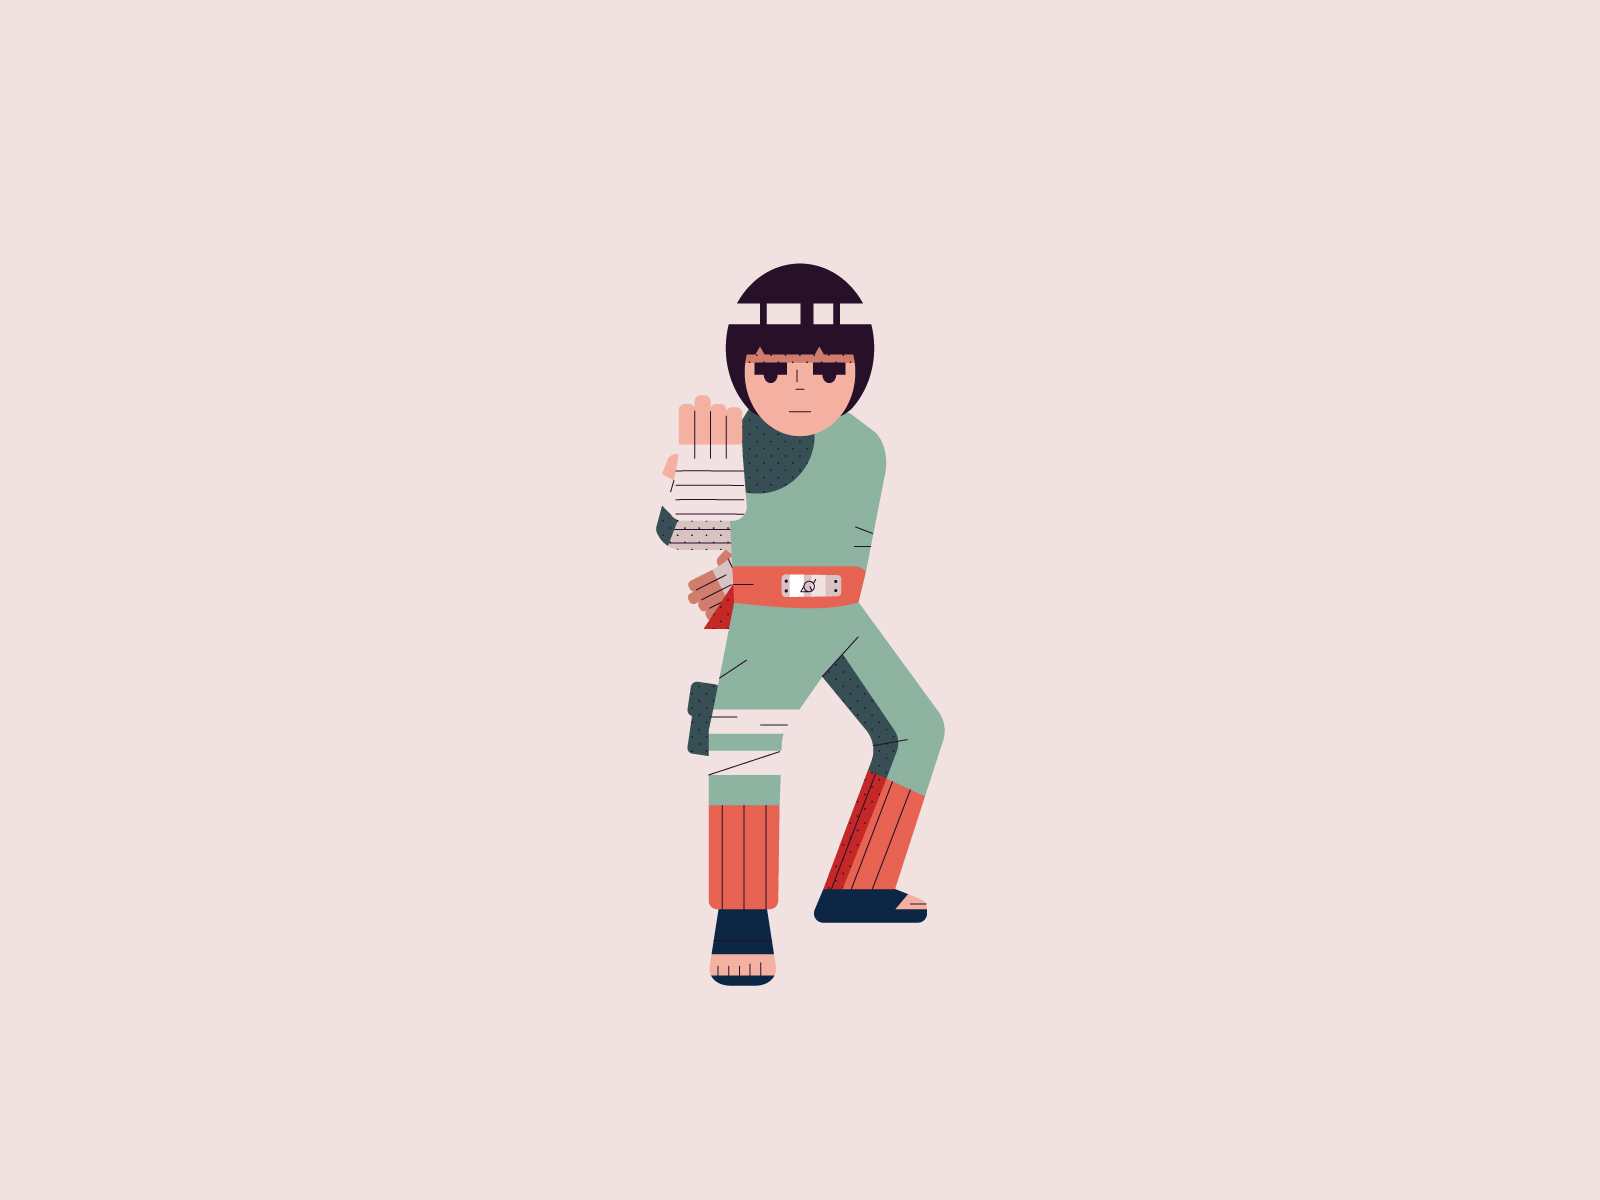 Naruto Rock Lee Posters  Rock Lee Posters  Anime Posters